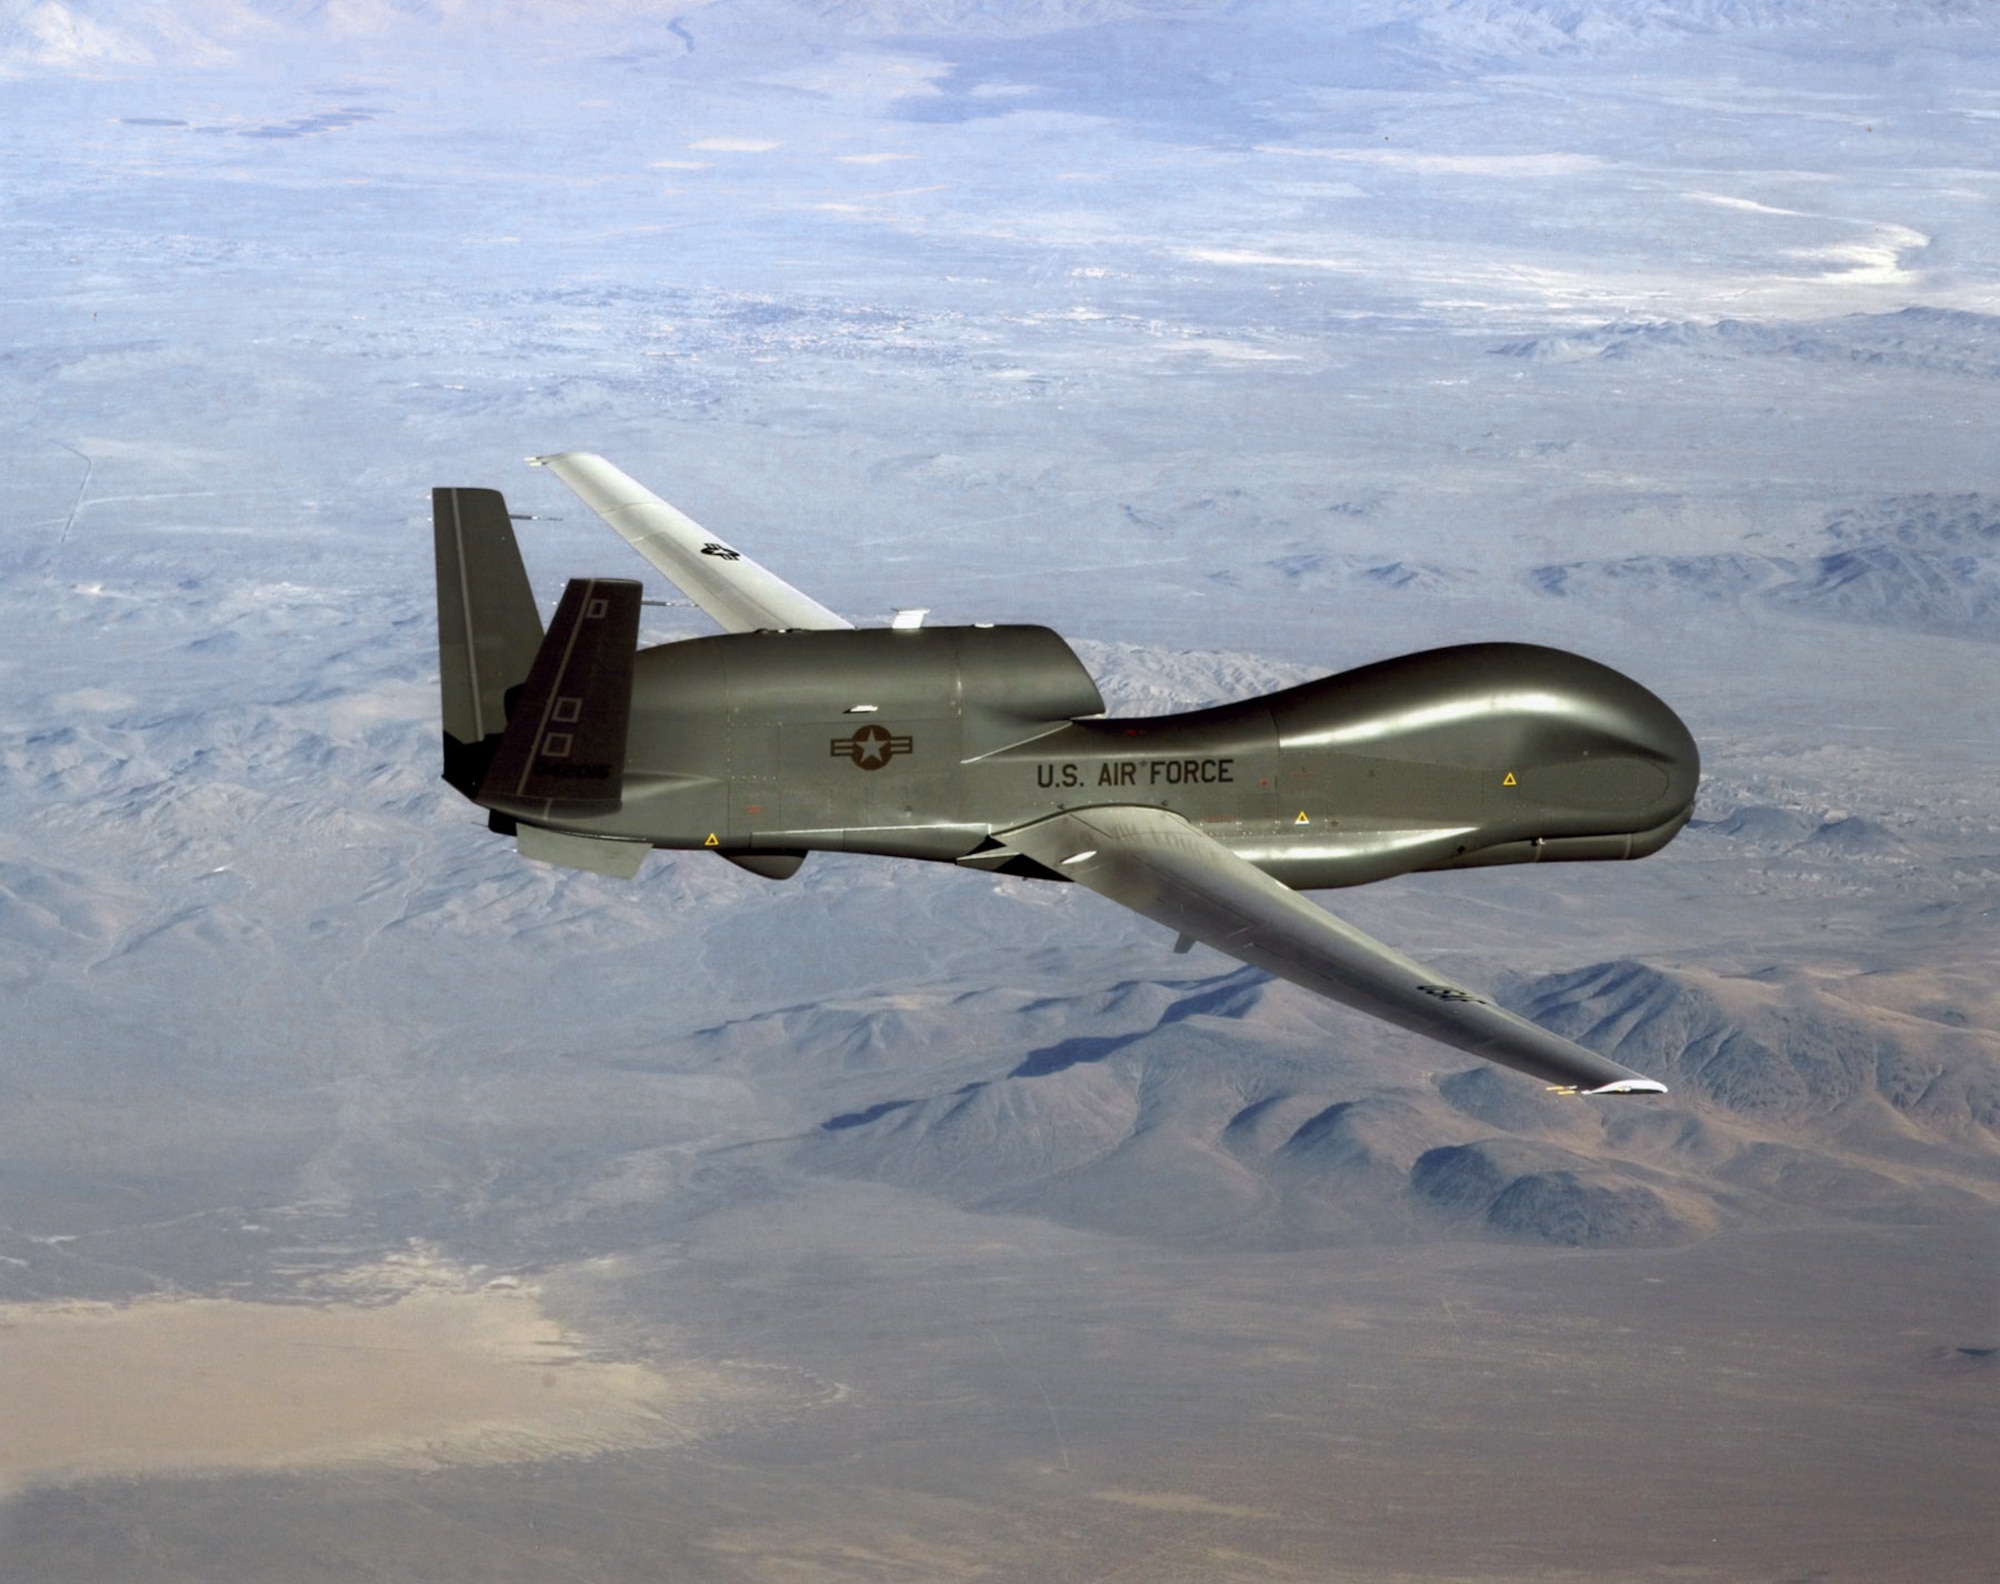 Robins Air Force Base is the first installation hosting an air Logistics Complex to receive an RQ-4 Global Hawk for paint and depaint work. Shown here, an RQ-4 Global Hawk soars through the sky to record intelligence, surveillence and reconnaissance data. (Courtesy photo)